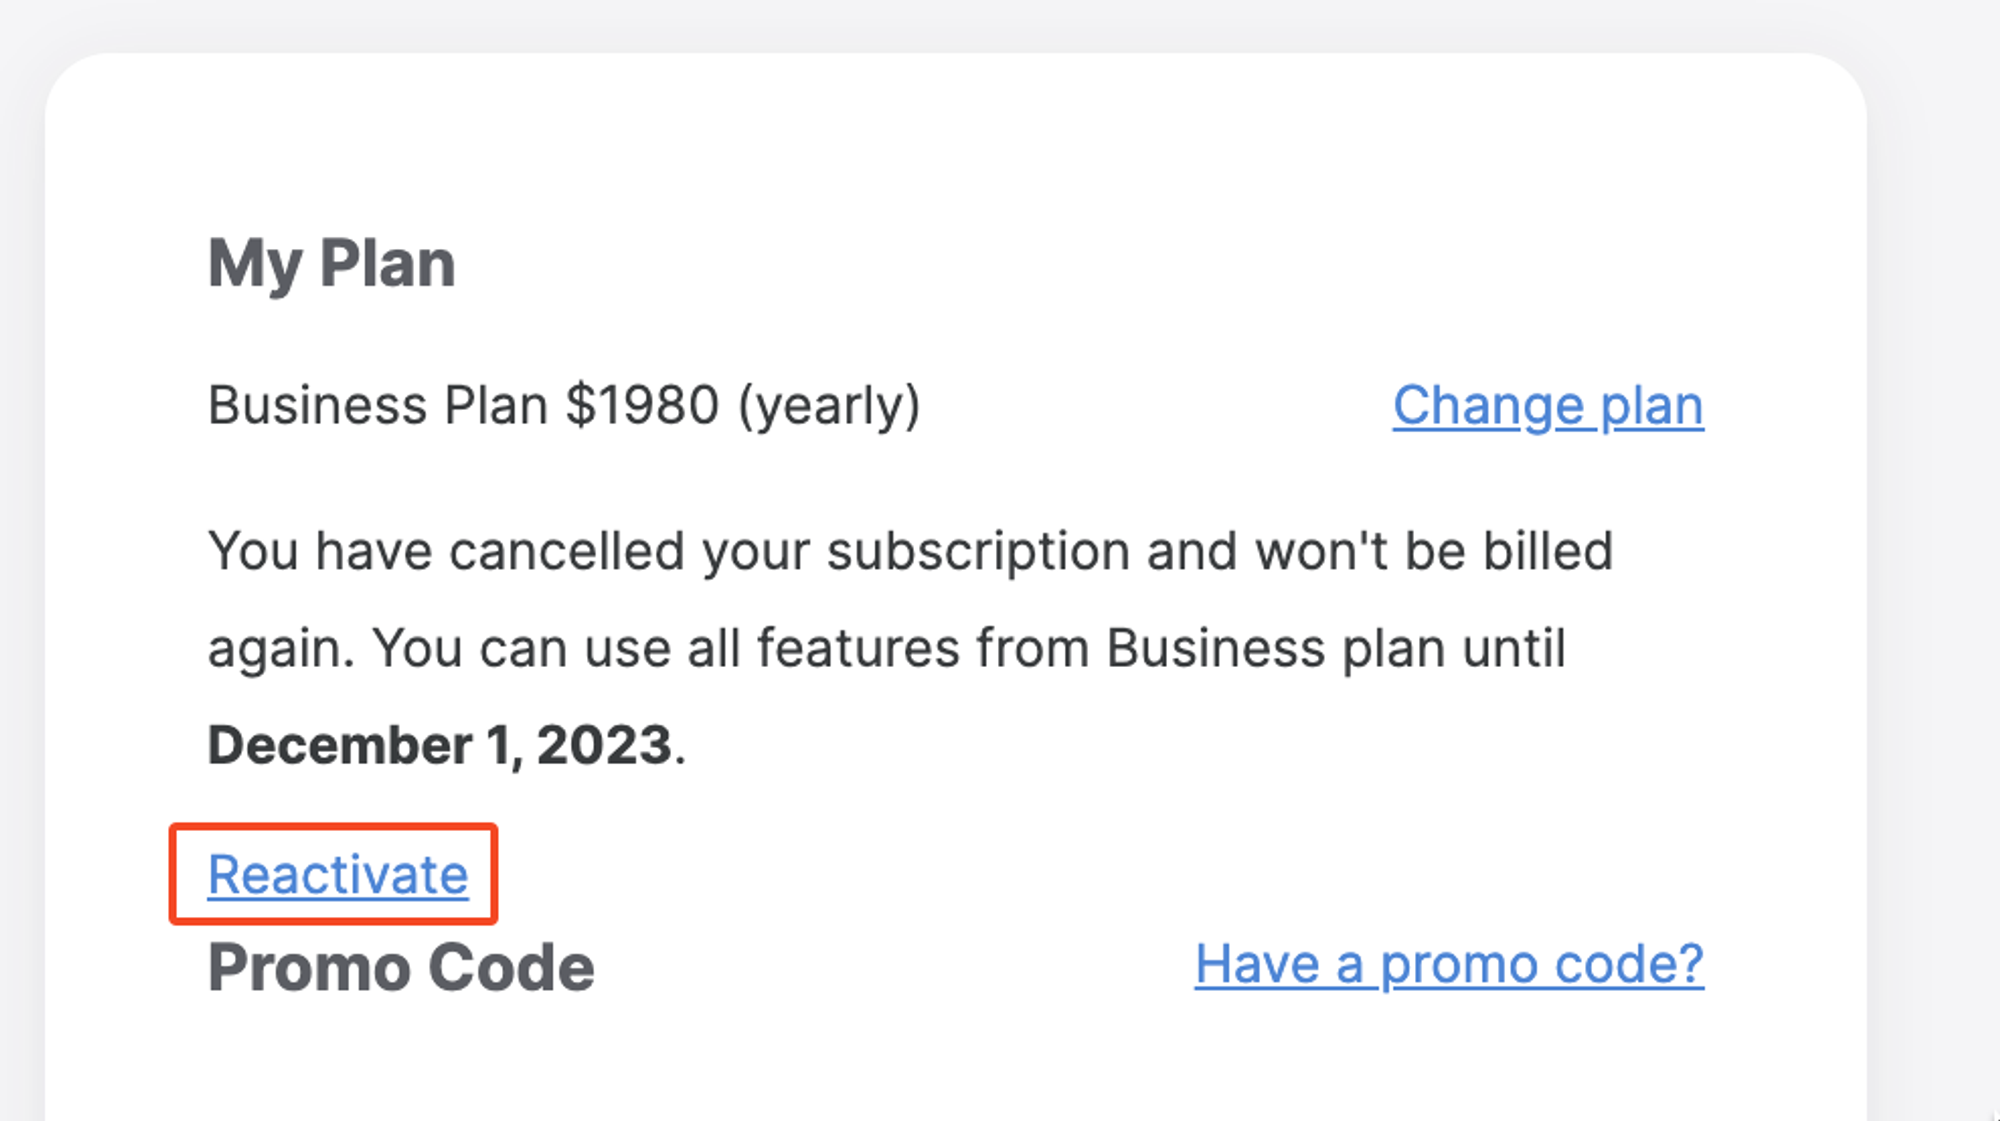 The option to reactivate the subscription